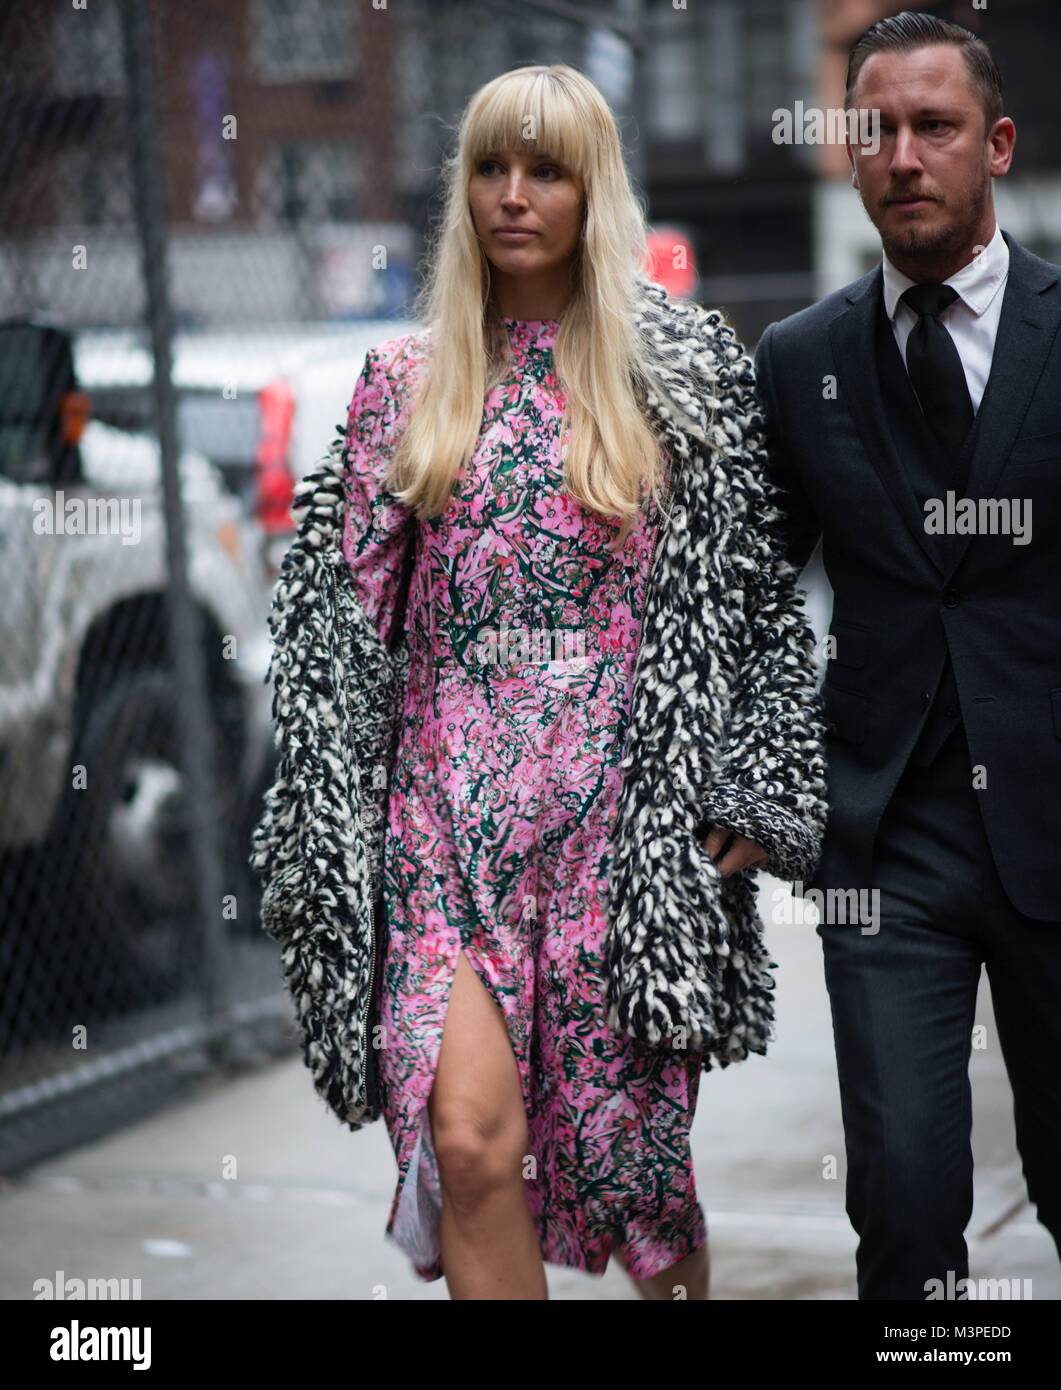 New York City, USA. 10th Feb, 2018. A chic showgoer arriving for a runway show during New York Fashion Week - Feb 9, 2018 - Credit: Runway Manhattan/Michelle Sangster | Verwendung weltweit/dpa/Alamy Live News Stock Photo